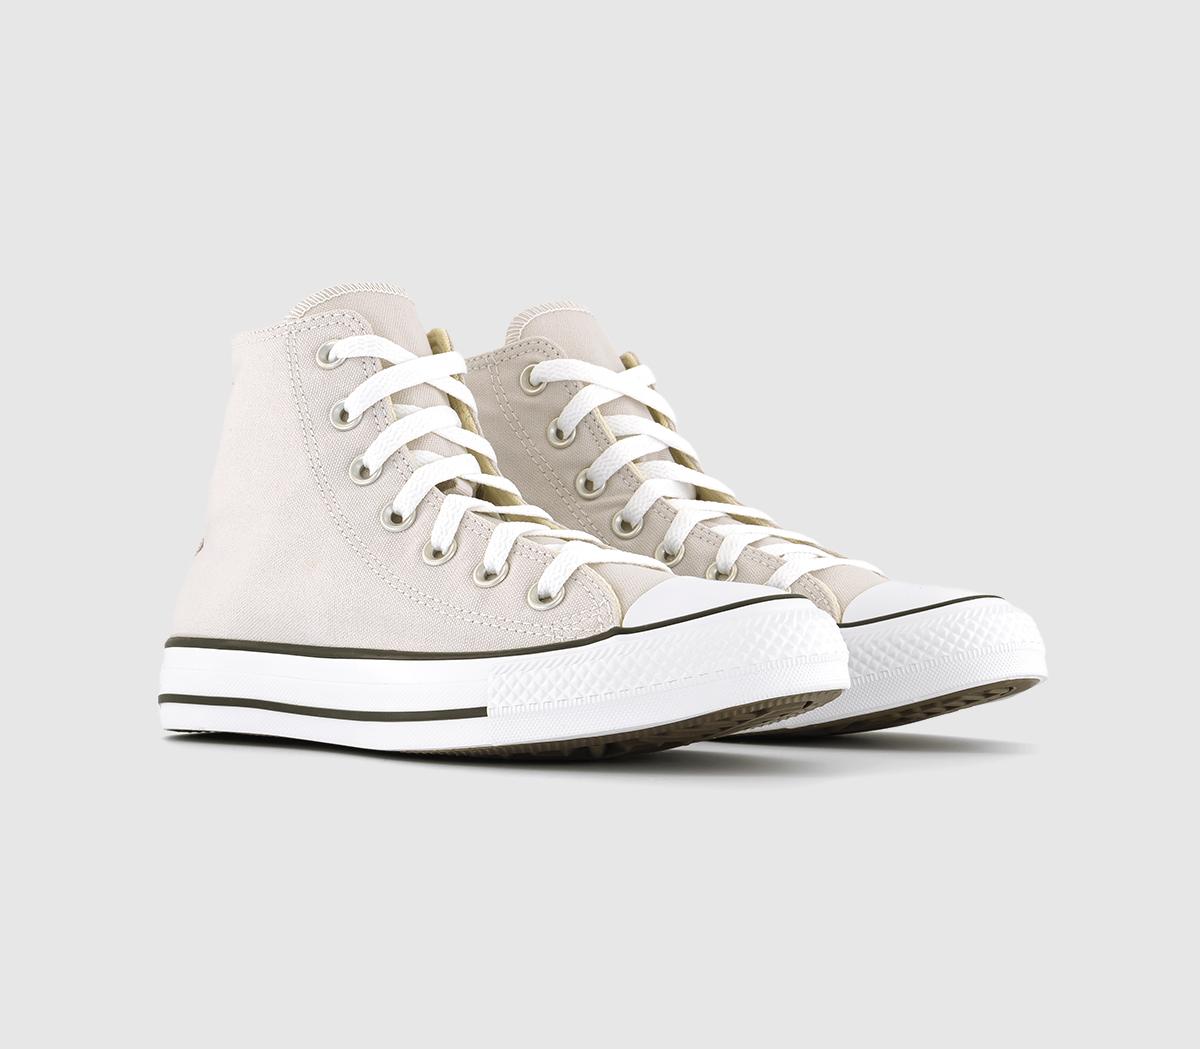 Converse All Star Hi Trainers Pale Putty White Black Natural, 6